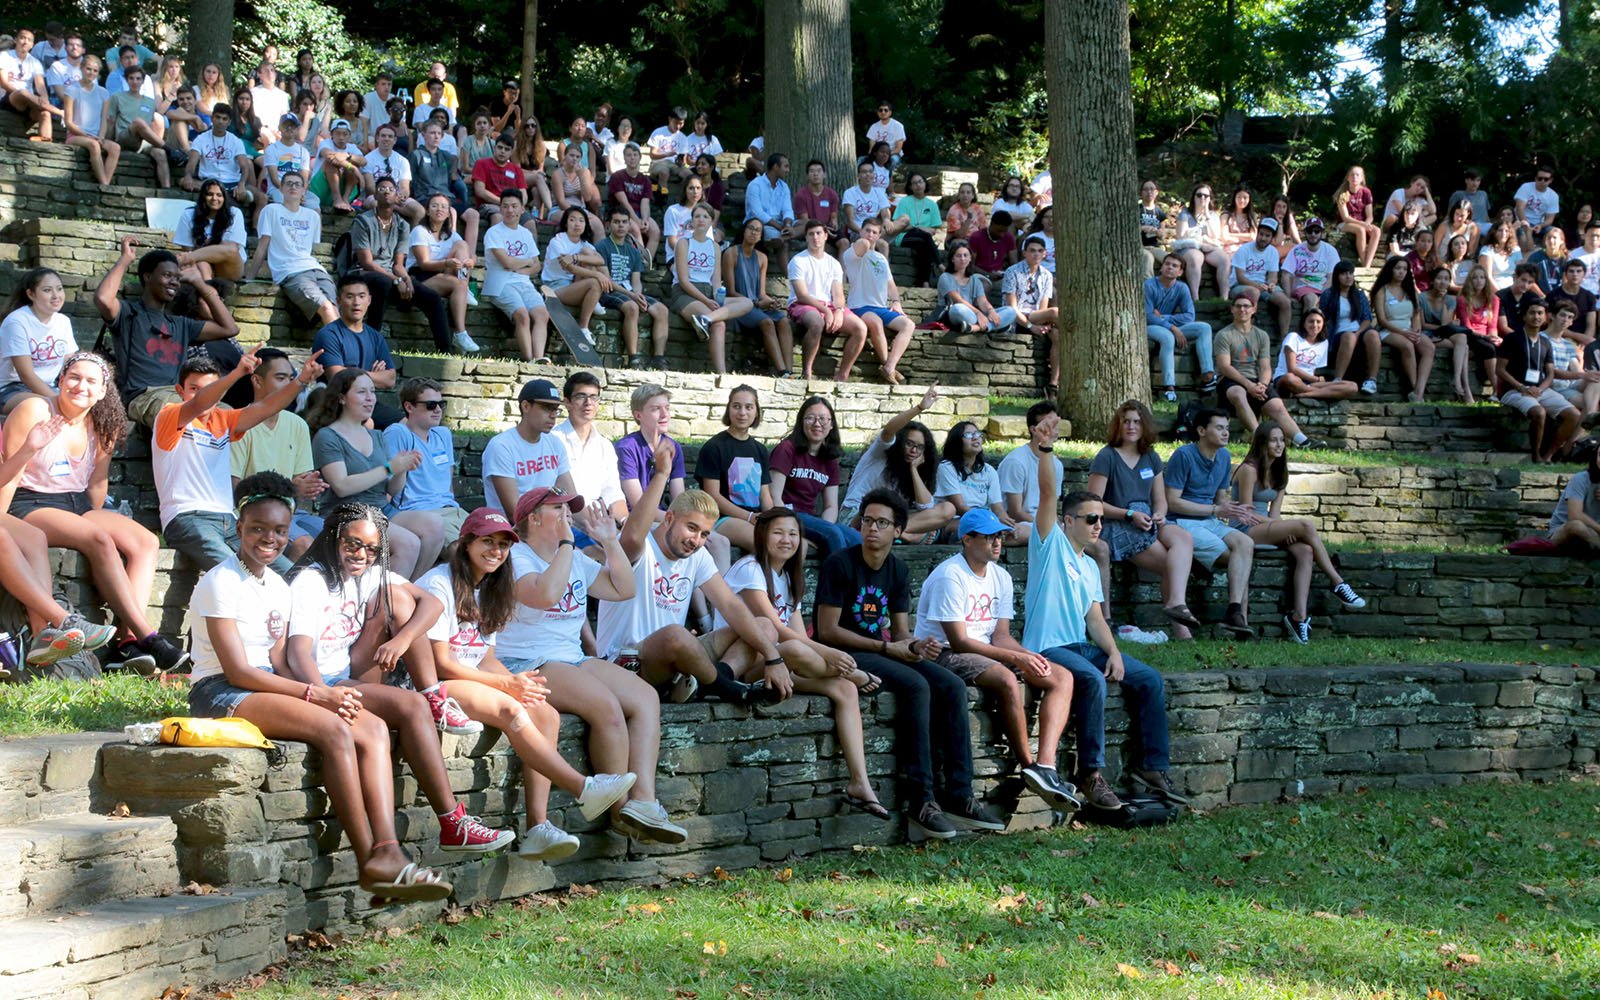 Students gathered in ampitheater